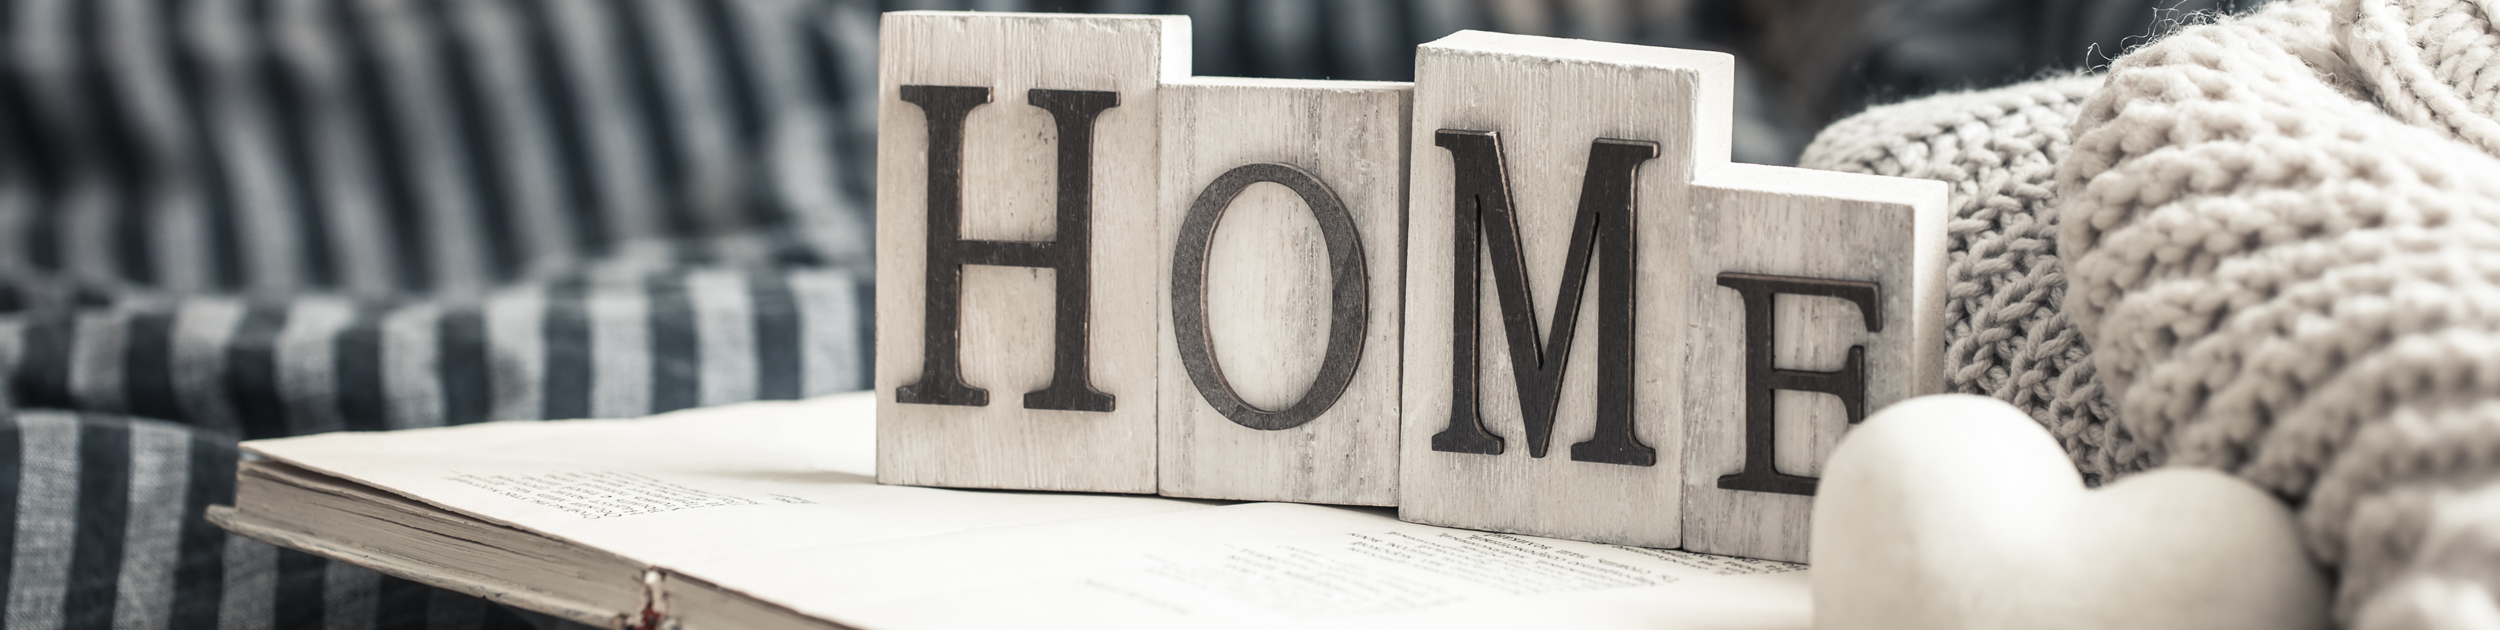 The word HOME spelled out in wooden blocks in a cozy environment